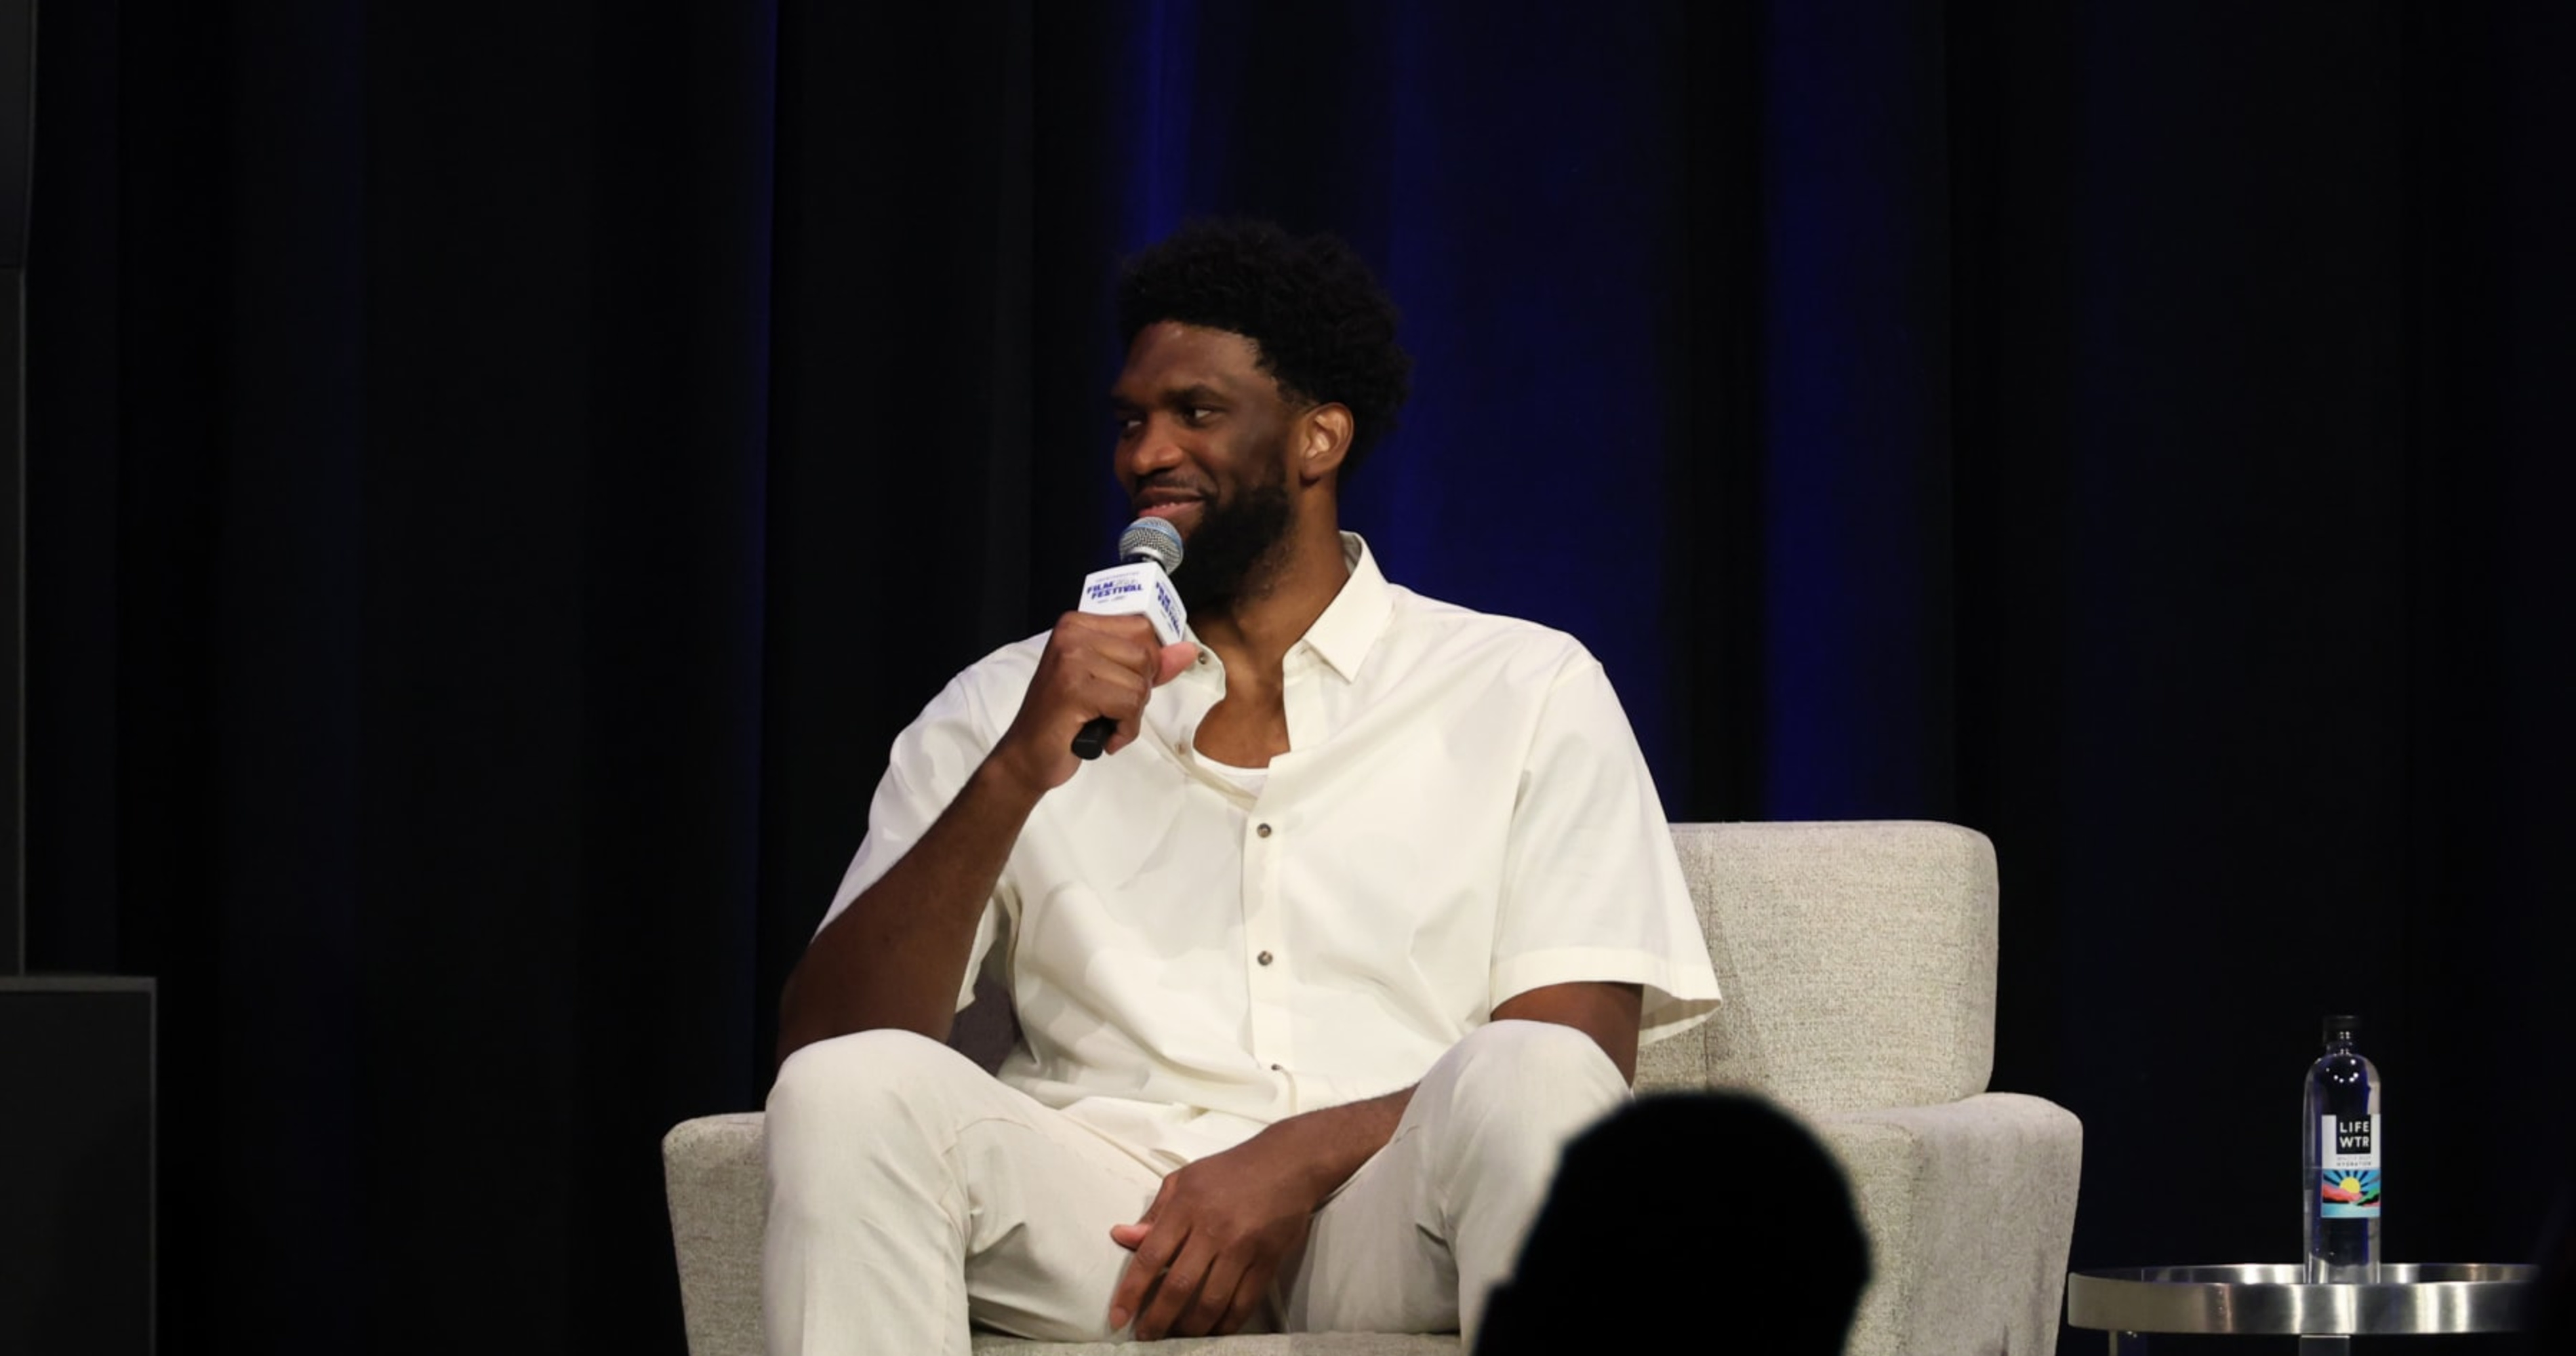 Joel Embiid still “happy to be a Sixer”